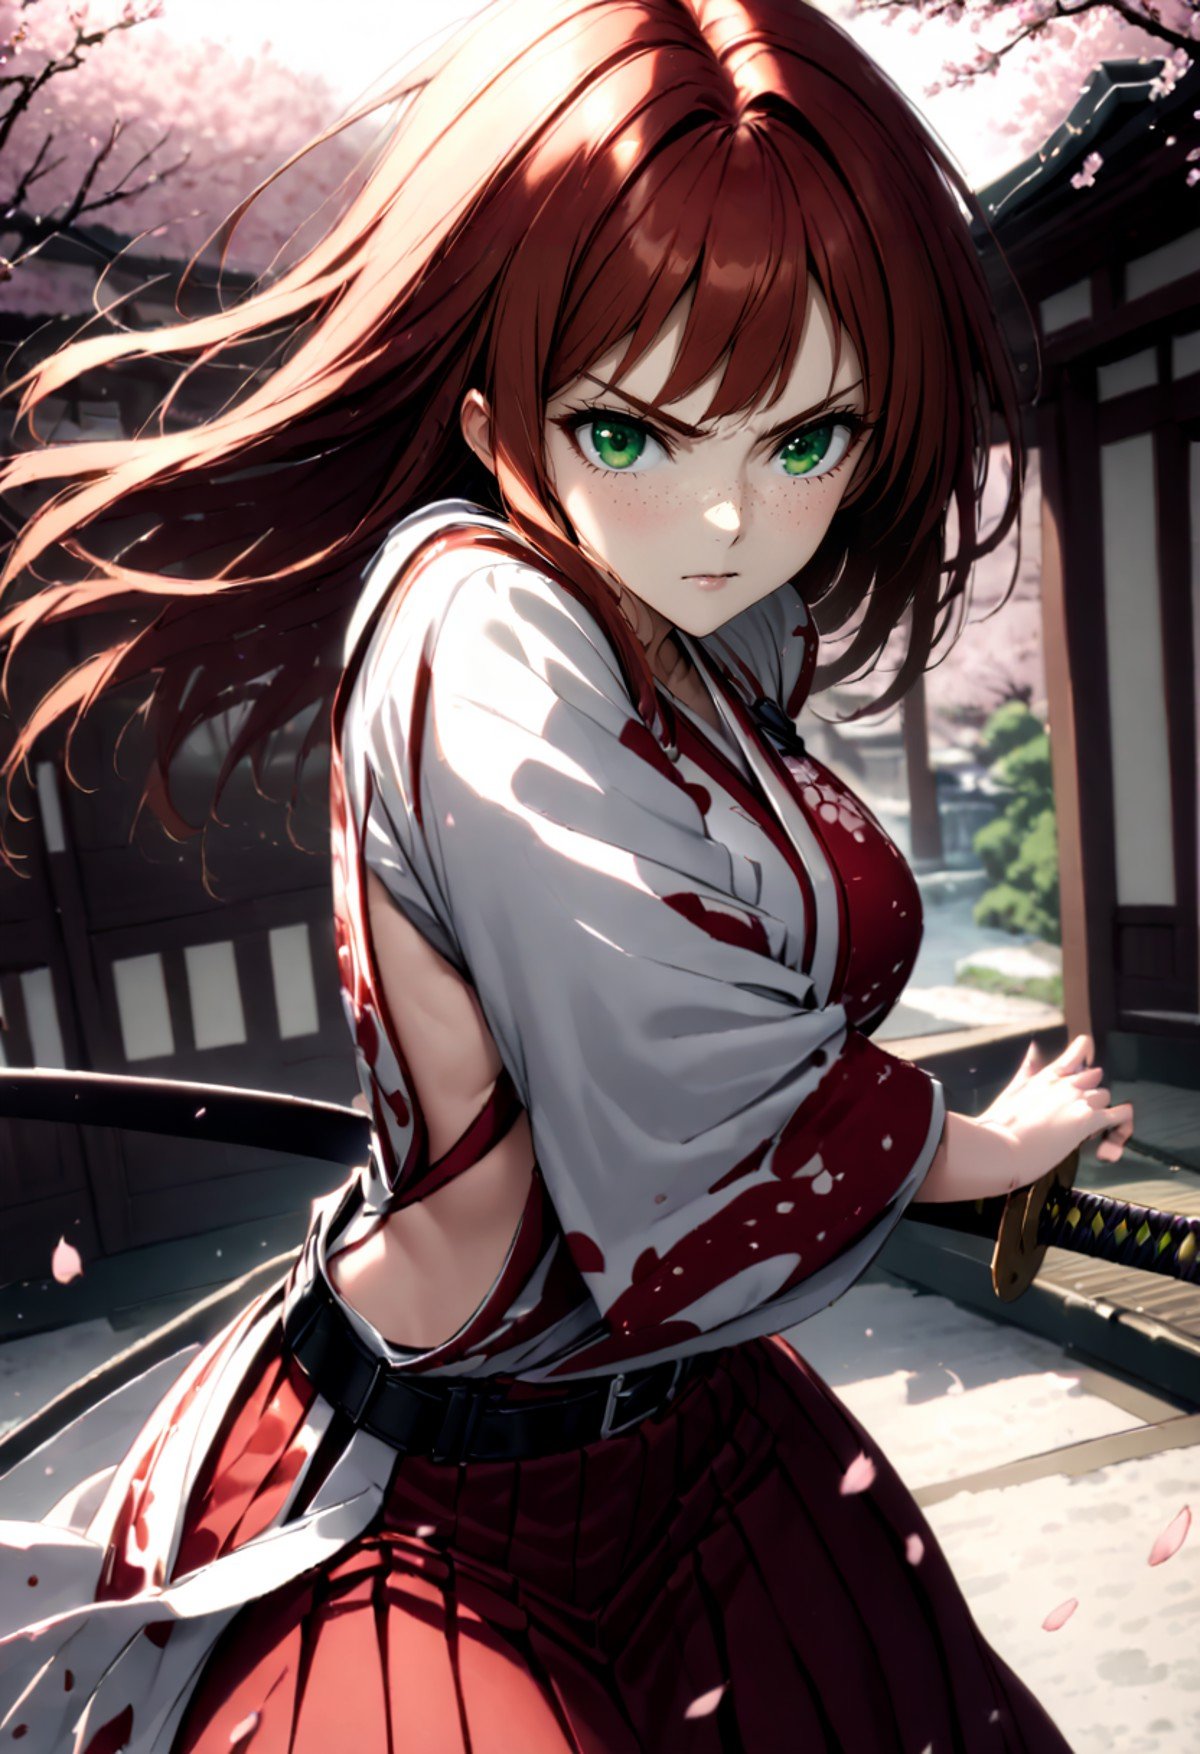 a realistic 20 year old anime kmw top model redhead woman, freckles,battoujutsu sword stance,sword, katana, sheathed,incoming attack,dynamic,((traditional japanese white ornate battle kimono, black belt)),serious, focused,agressive,small breasts, flat chest,japanese architecture background, sakura blossoms, sakura trees,scenery,view from behing,green eyes, <lora:kmw_v53:1> <lora:battoujutsu-sword-stance:1>